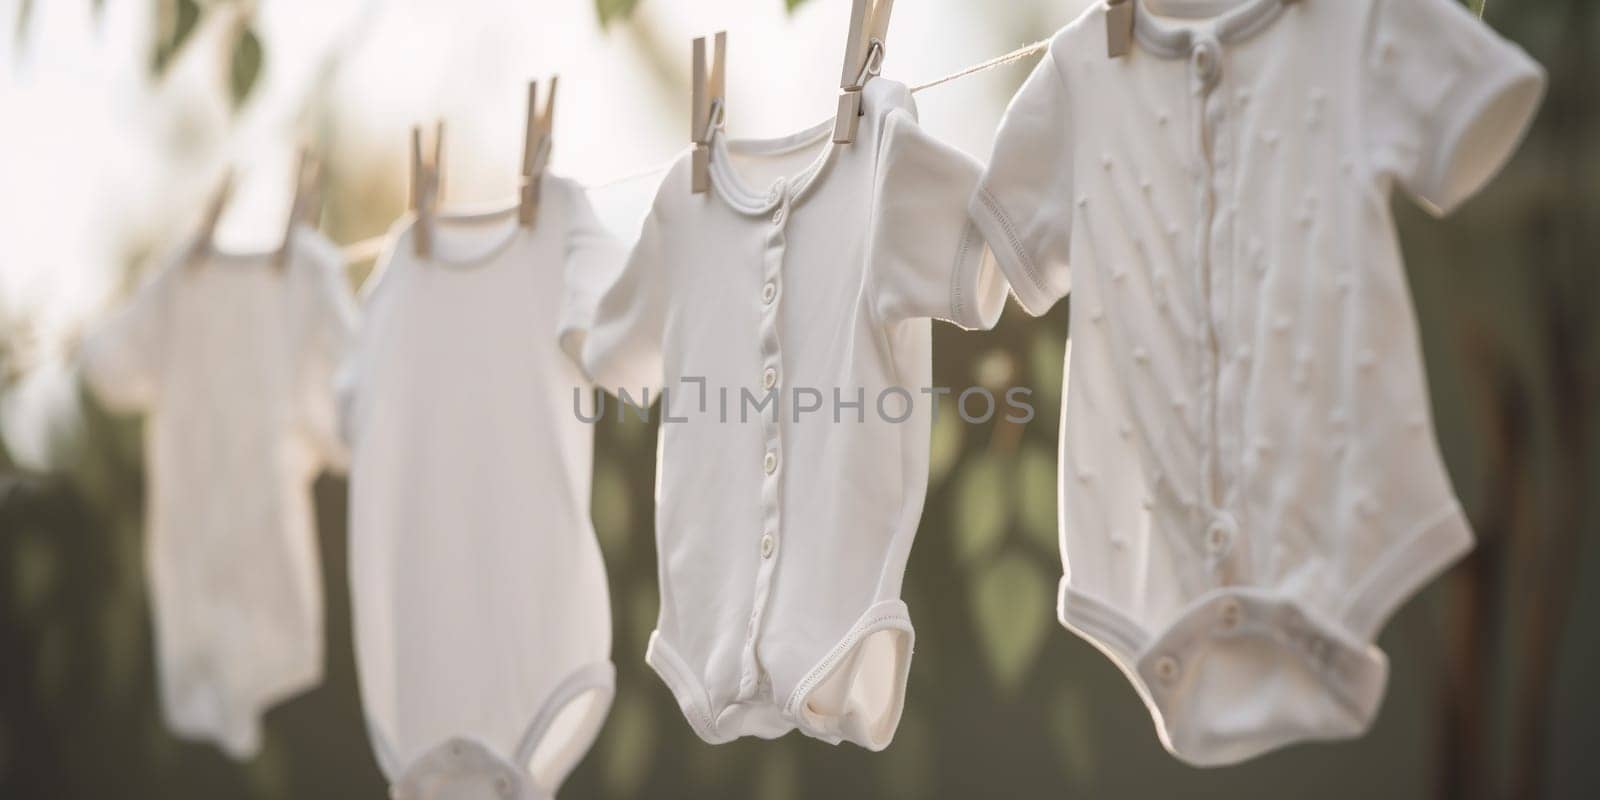 Baby Costumes For Newborns Are Dried On A Clothesline by tan4ikk1